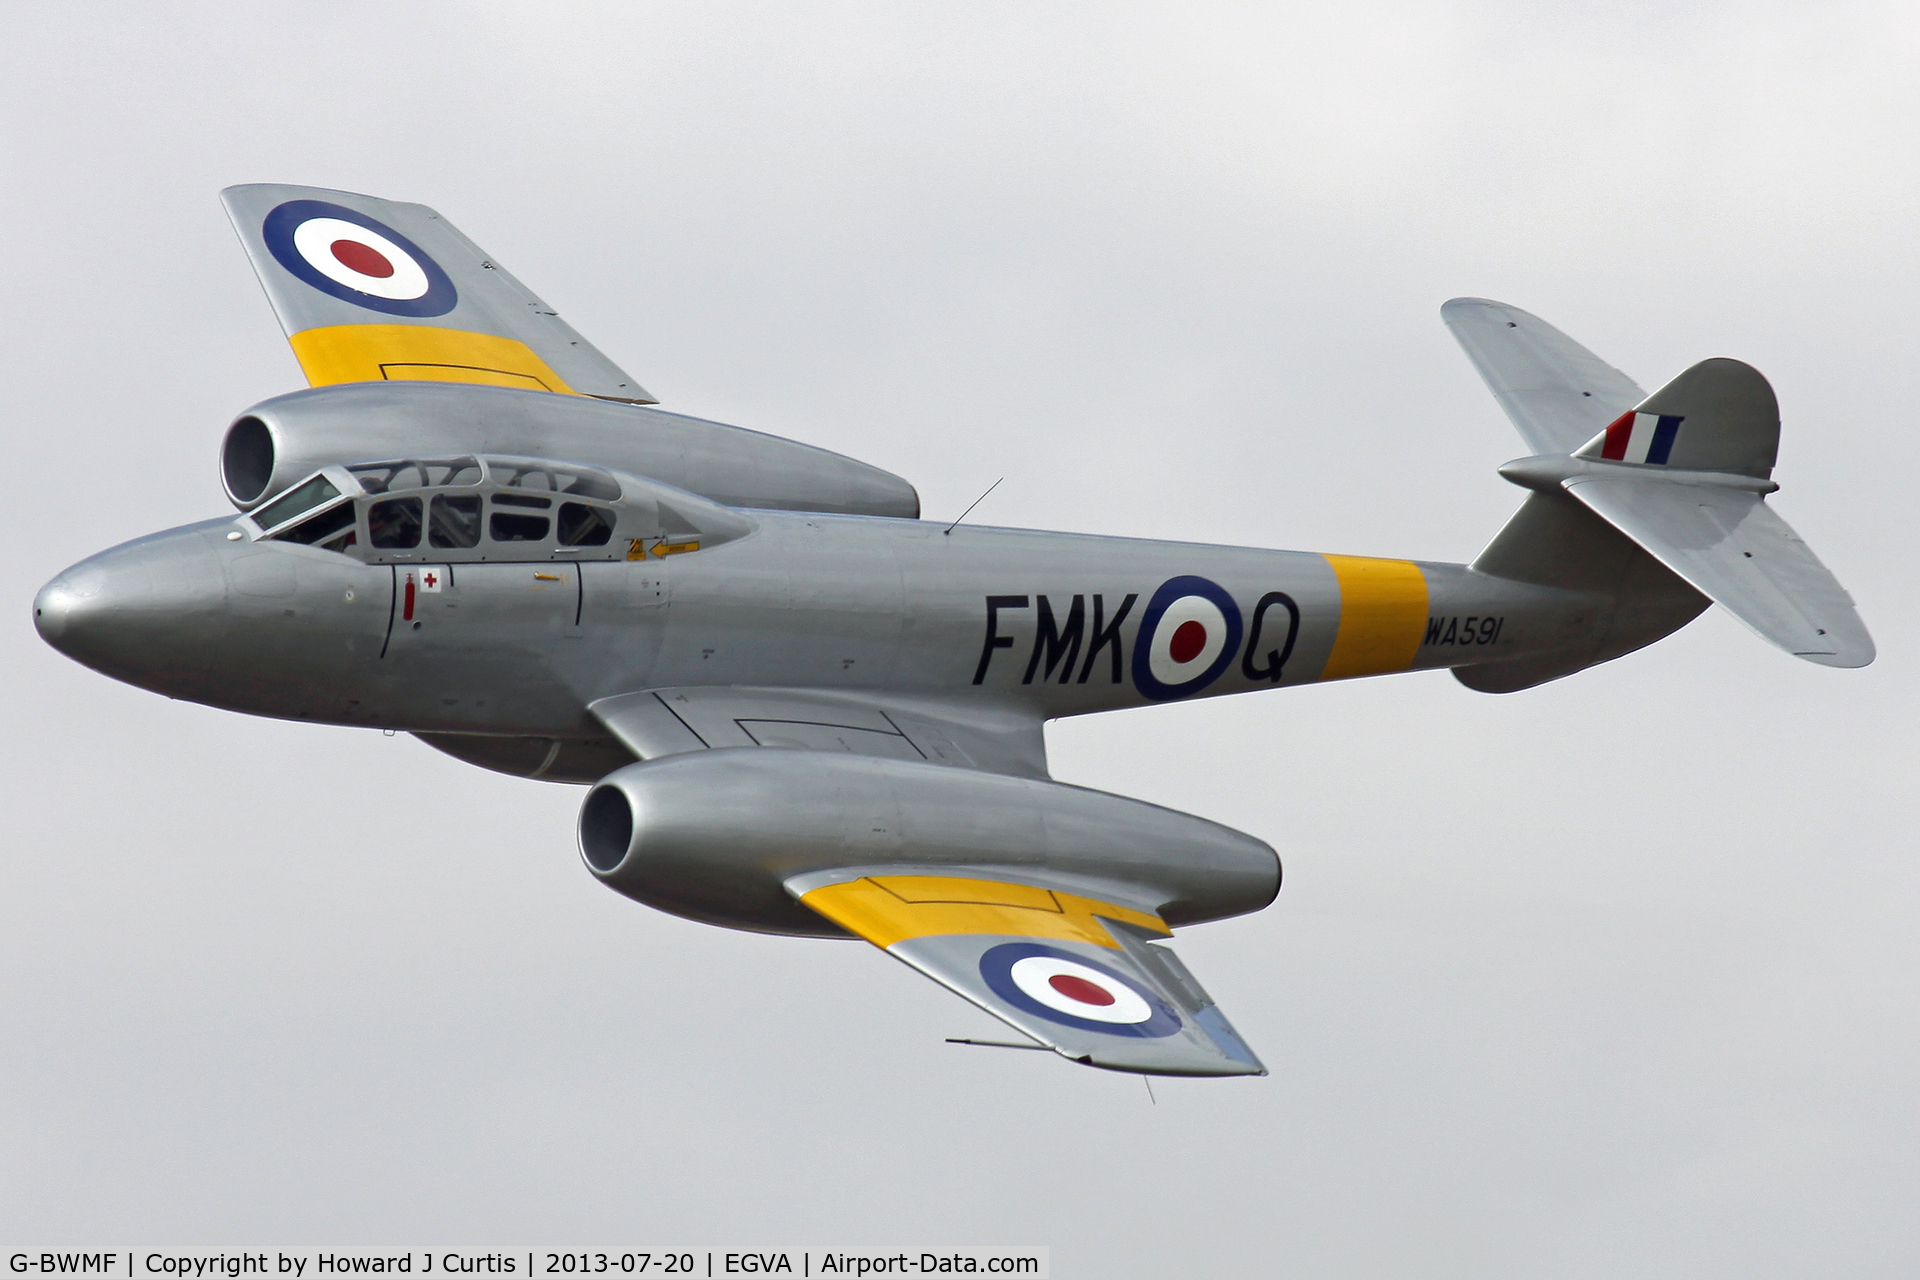 G-BWMF, 1949 Gloster Meteor T.7 C/N G5/356460, Painted as WA591/FMK-Q. At the Royal International Air Tattoo 2013.